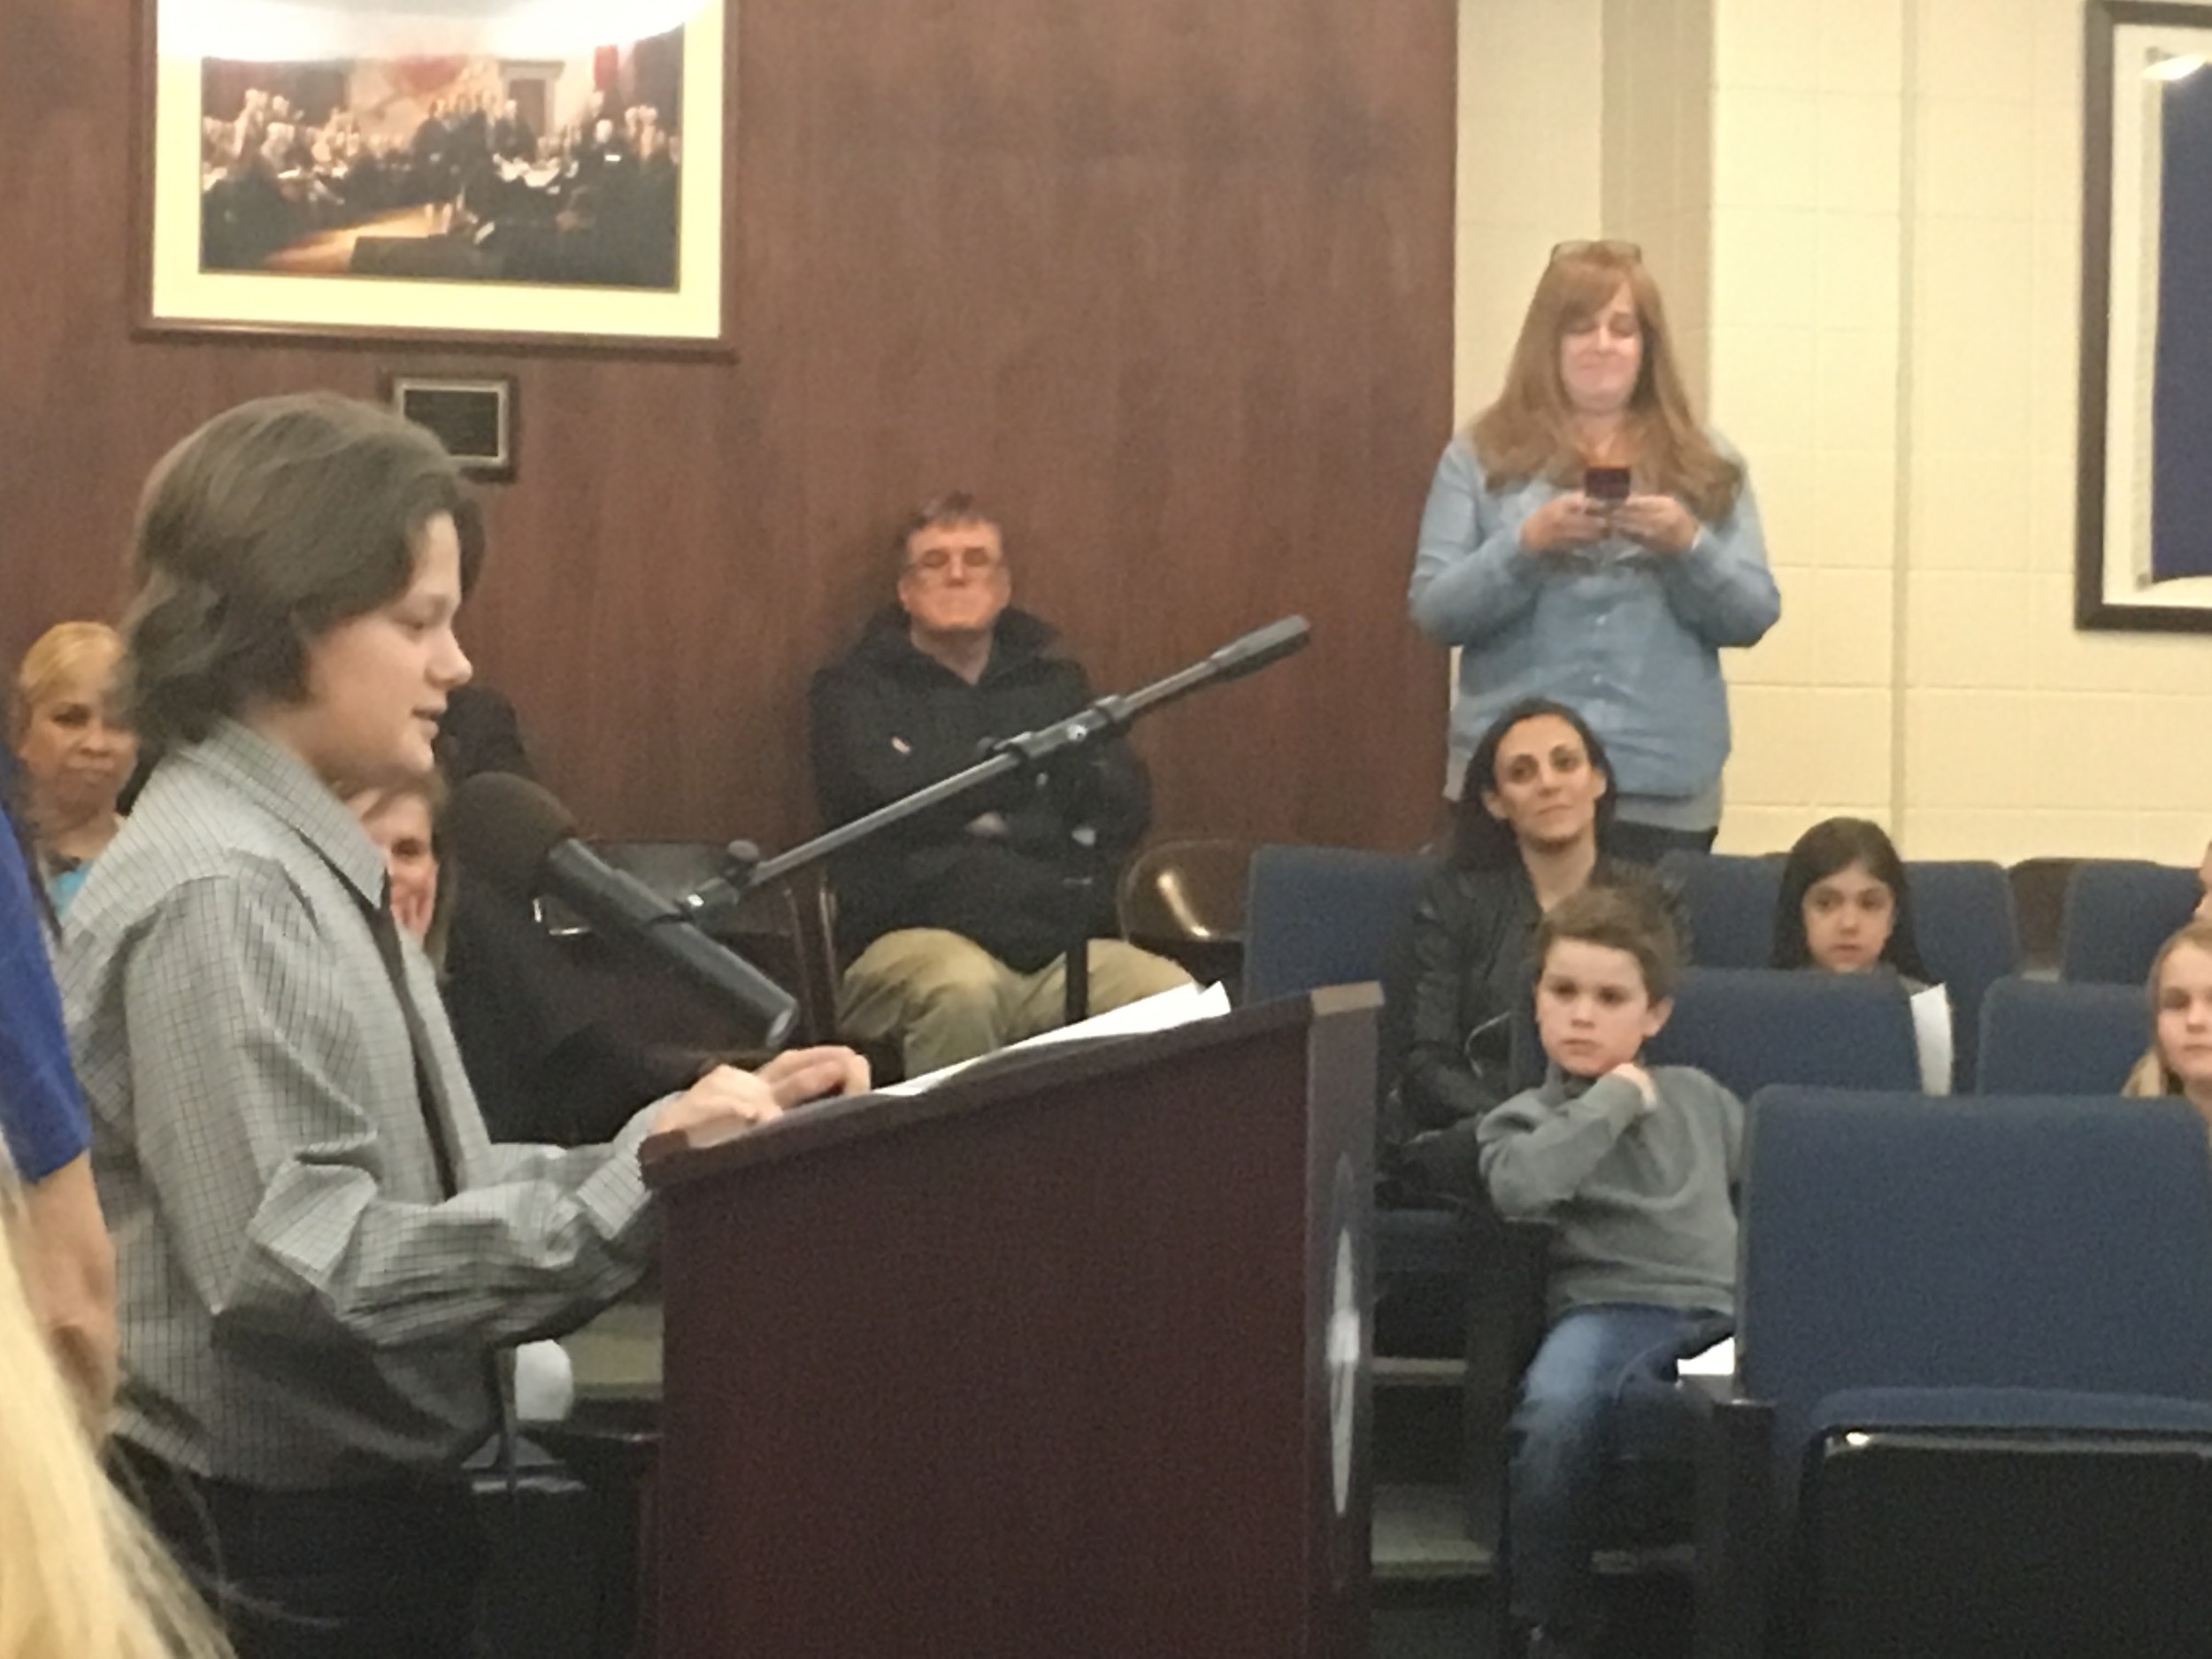 Gerardo Perna, a fifth-grader at Marion Street, spoke about the environmental reasons to tax plastic bags.